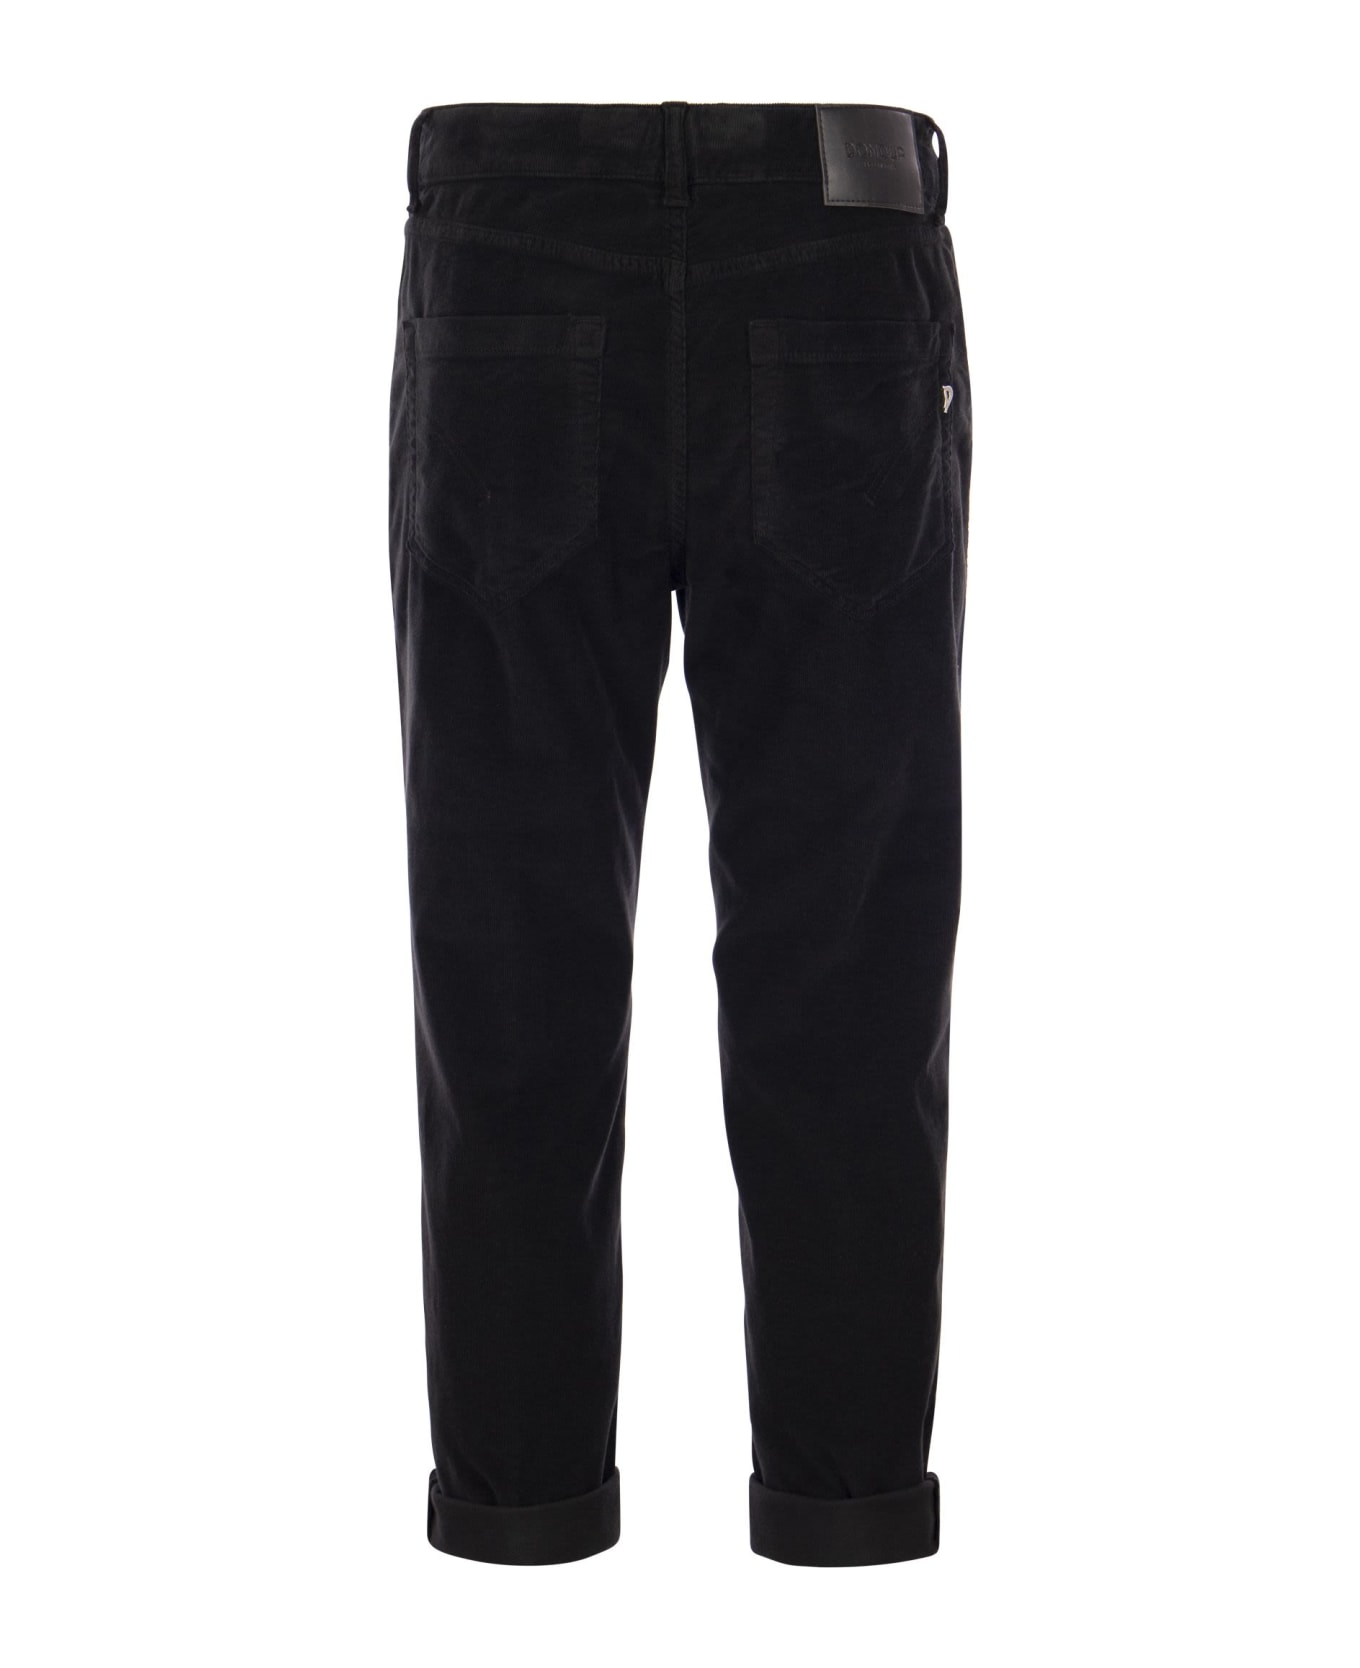 Dondup Koons - Multi-striped Velvet Trousers With Jewelled Buttons - Black デニム